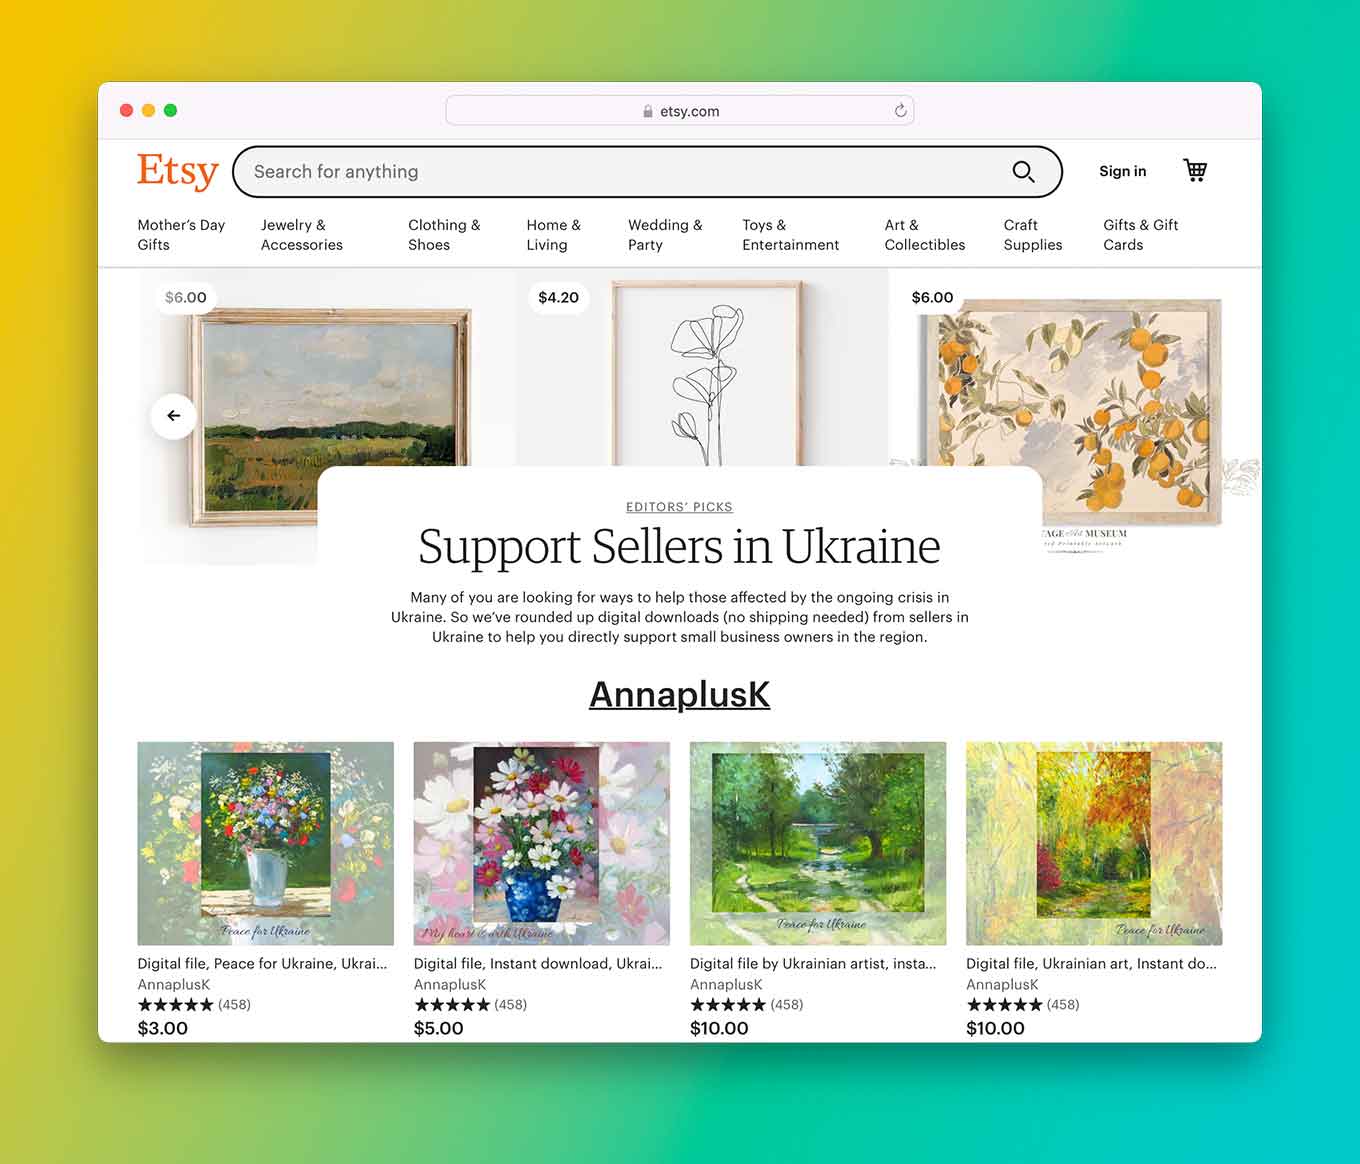 A screenshot of Etsy's curated collection of Etsy sellers in Ukraine. "Support Sellers n Ukraine: Many of you are looking for ways to help those affected by the ongoing crisis in Ukraine. So we've rounded up digital downloads (no shipping needed) from sellers in Ukraine to help you directly support small business owners in the region."